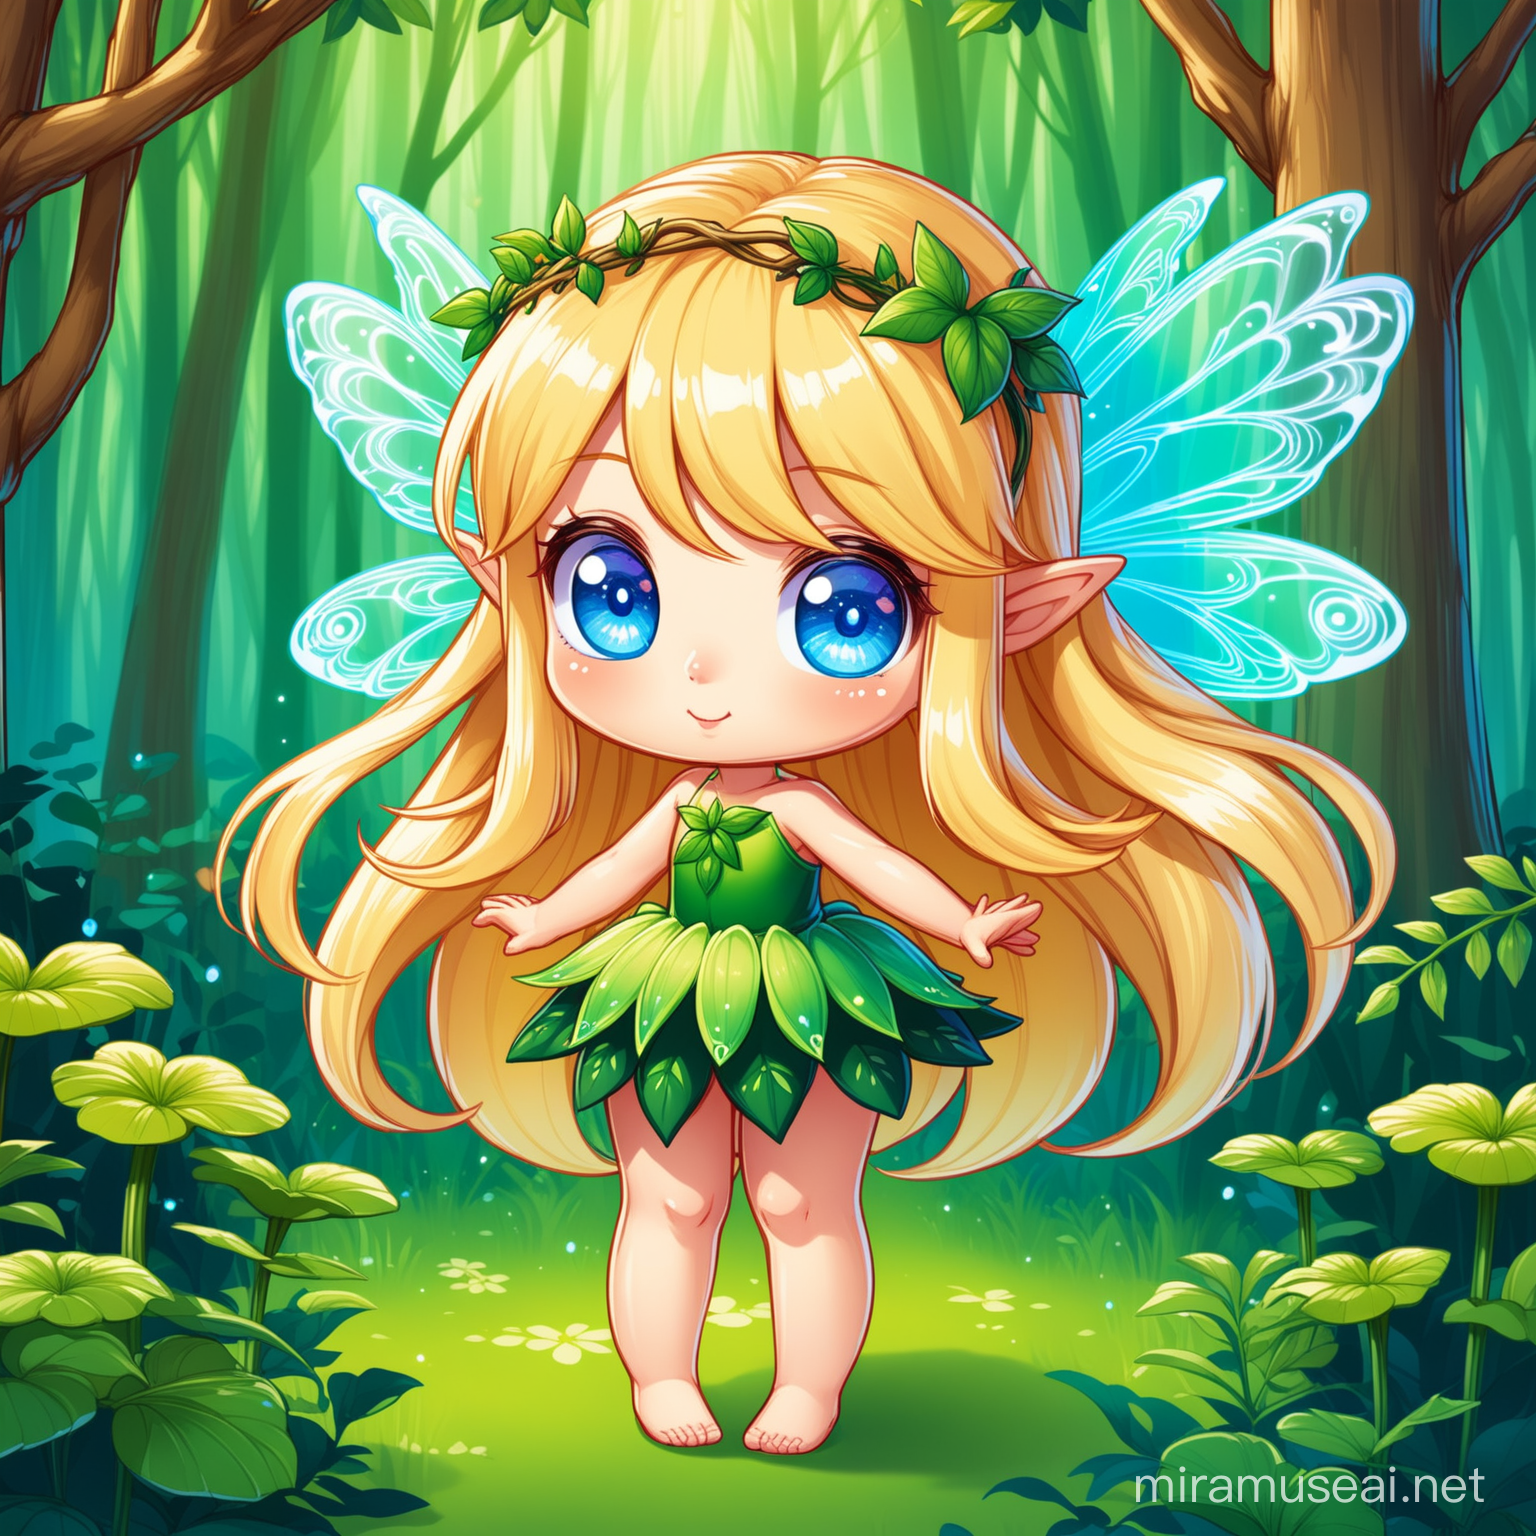 imagine poseable prompts, small forest fairy in cartoon style with long blonde hair and big blue eyes